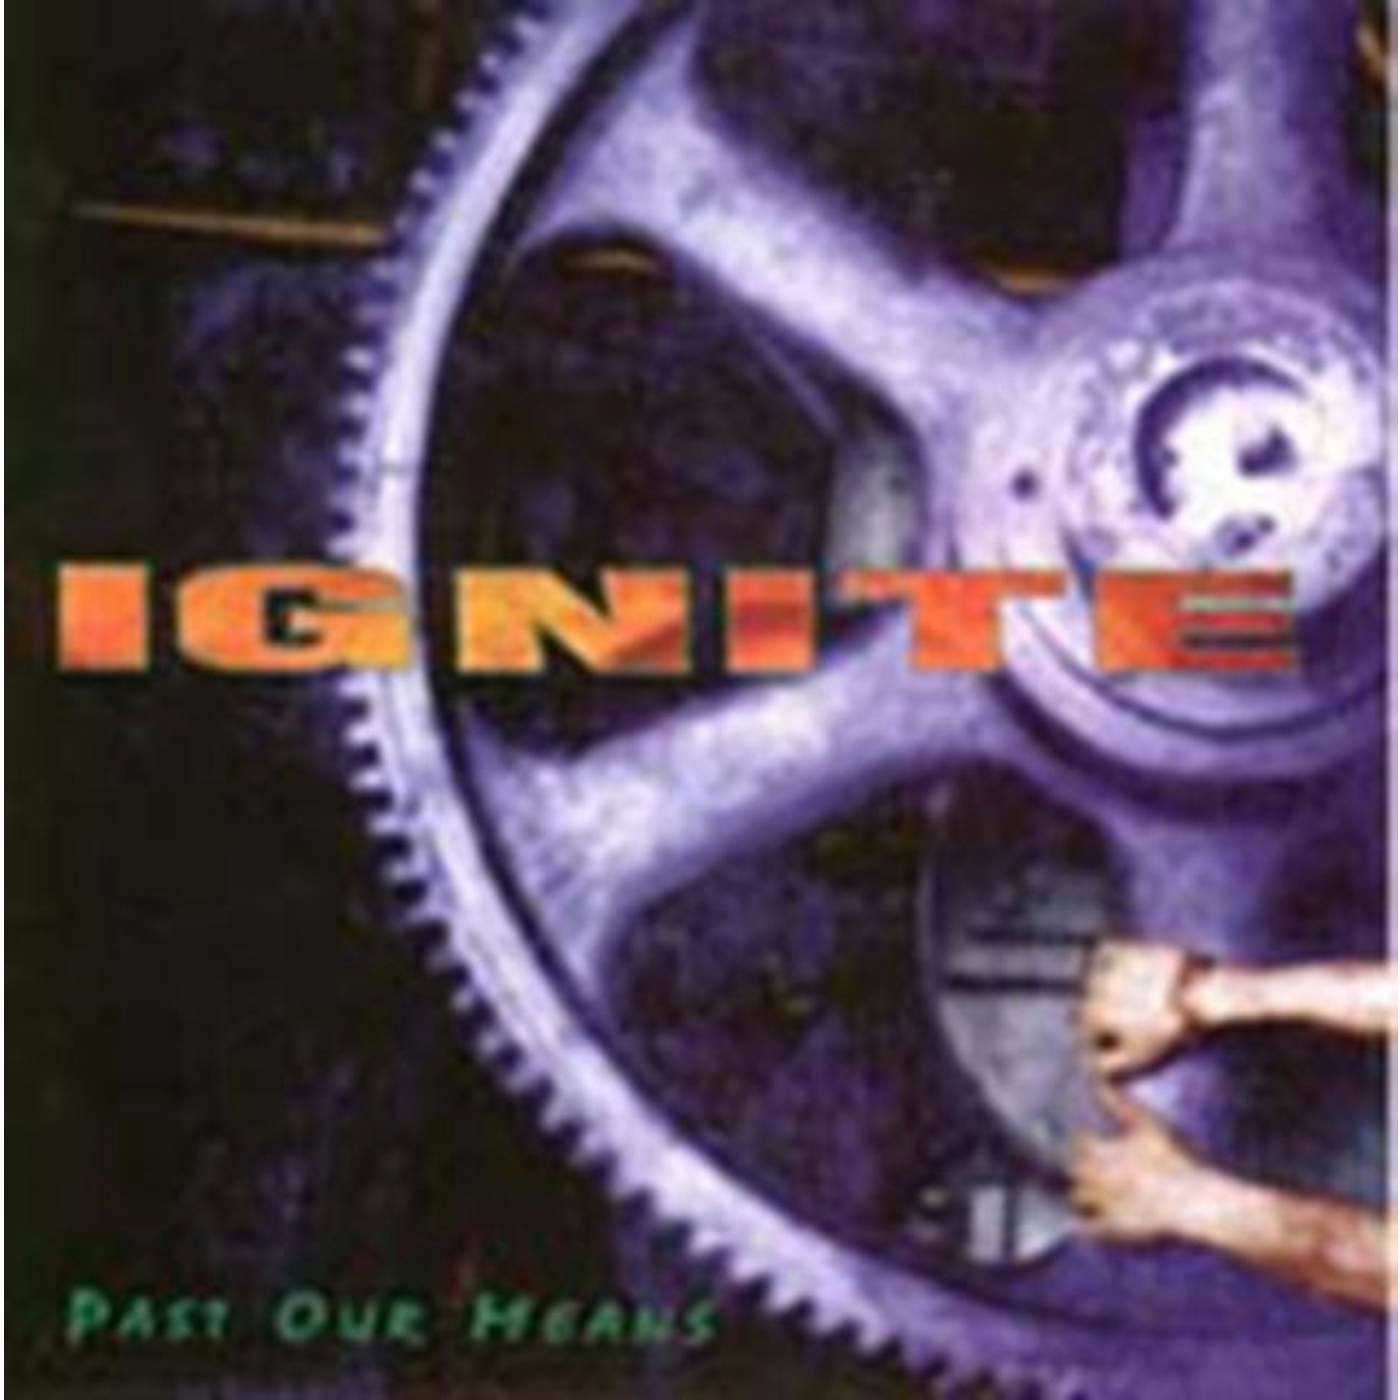 Ignite CD - Past Our Means